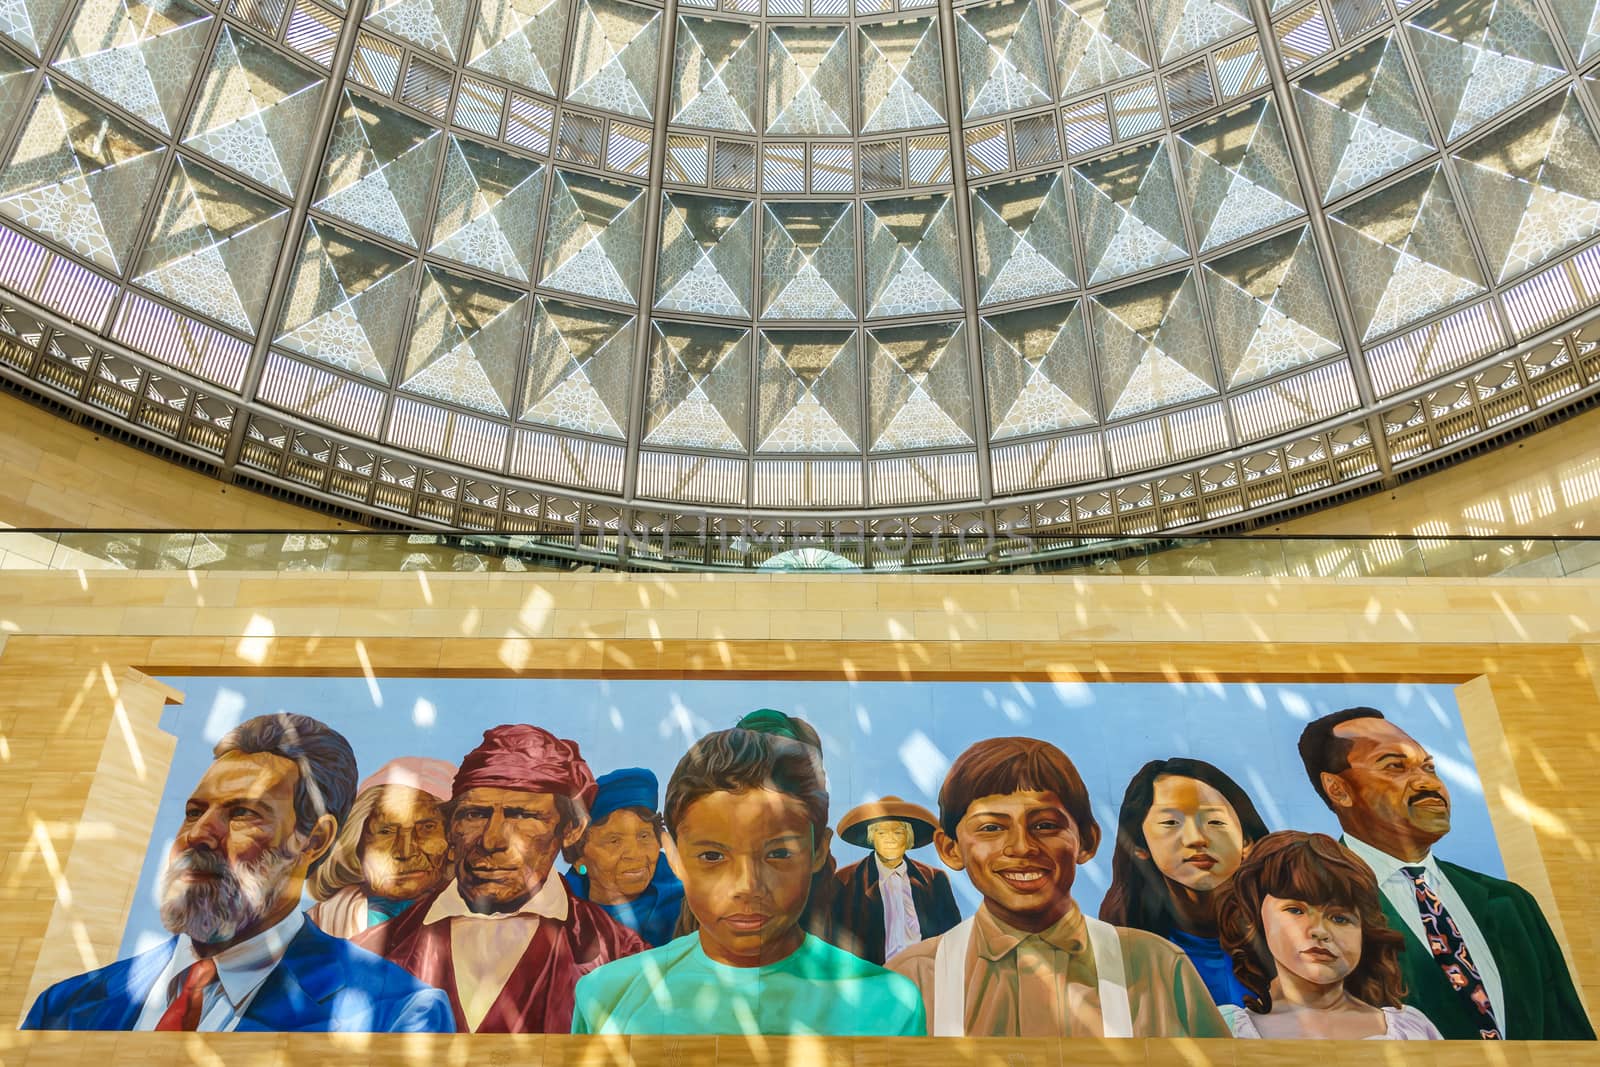 LOS ANGELES, CA/USA - AUGUST 29, 2015: Patsaouras Transit Plaza at Union Station mural of Gabrielino Indians and Latinos by artist Richard Wyatt.